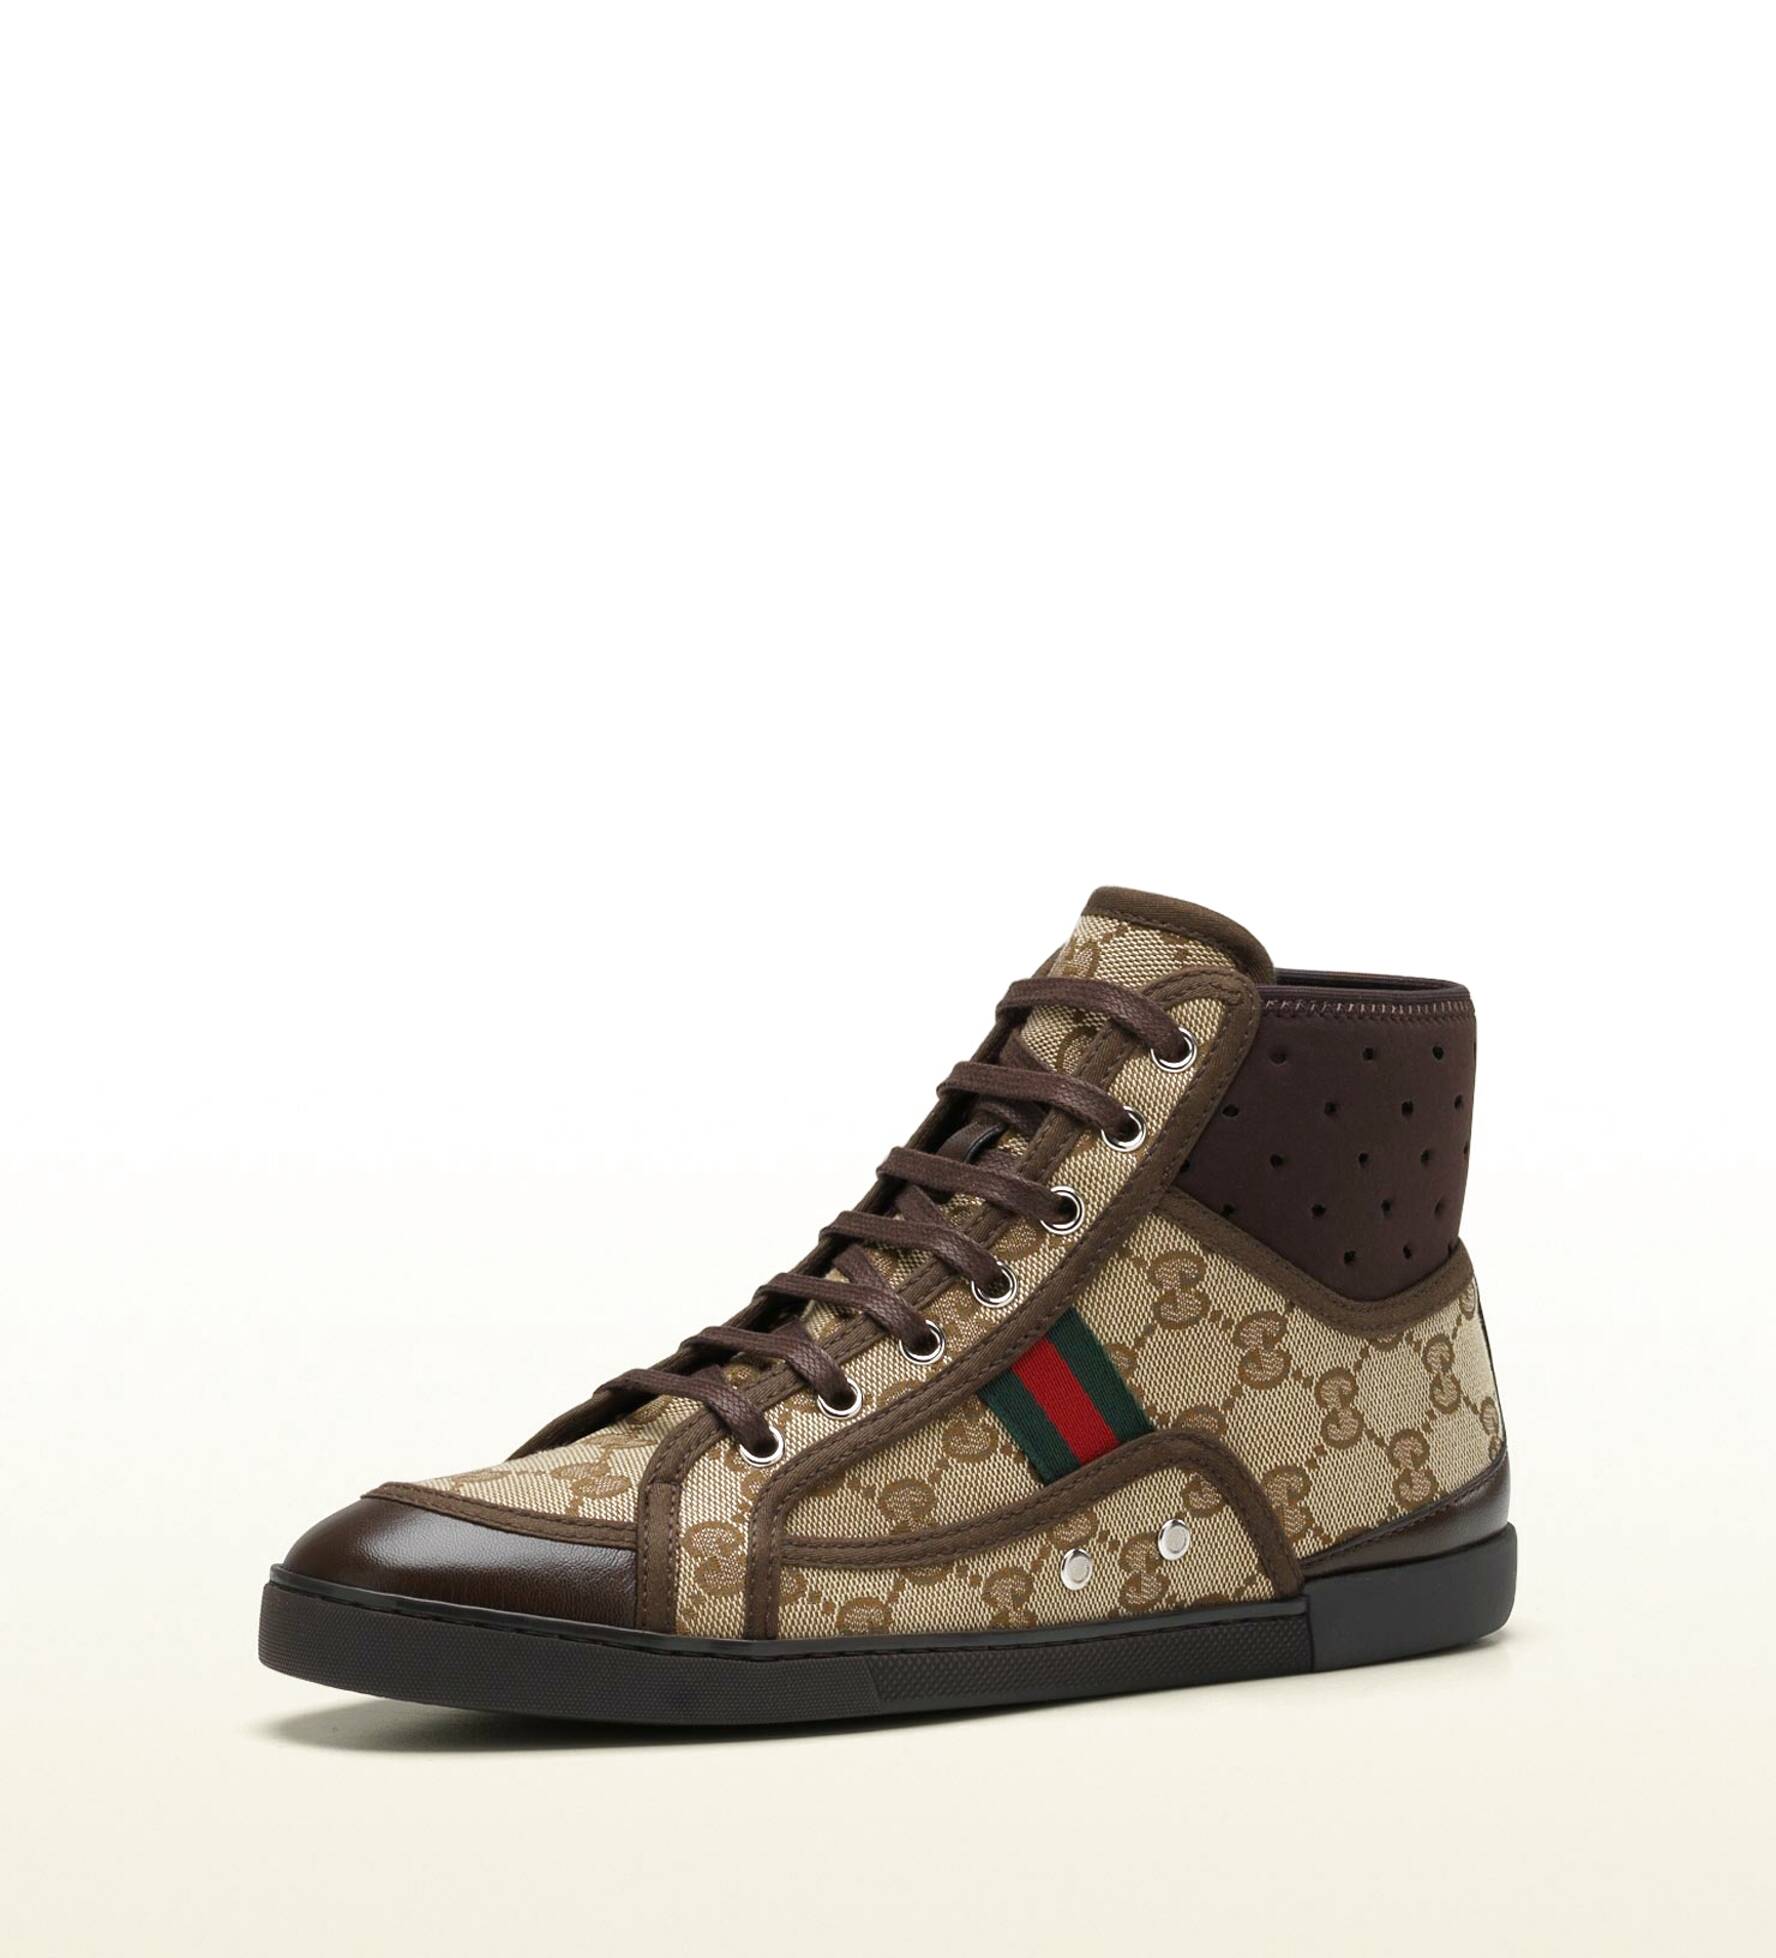 Women's Gucci Sneakers Sale | Literacy Ontario Central South